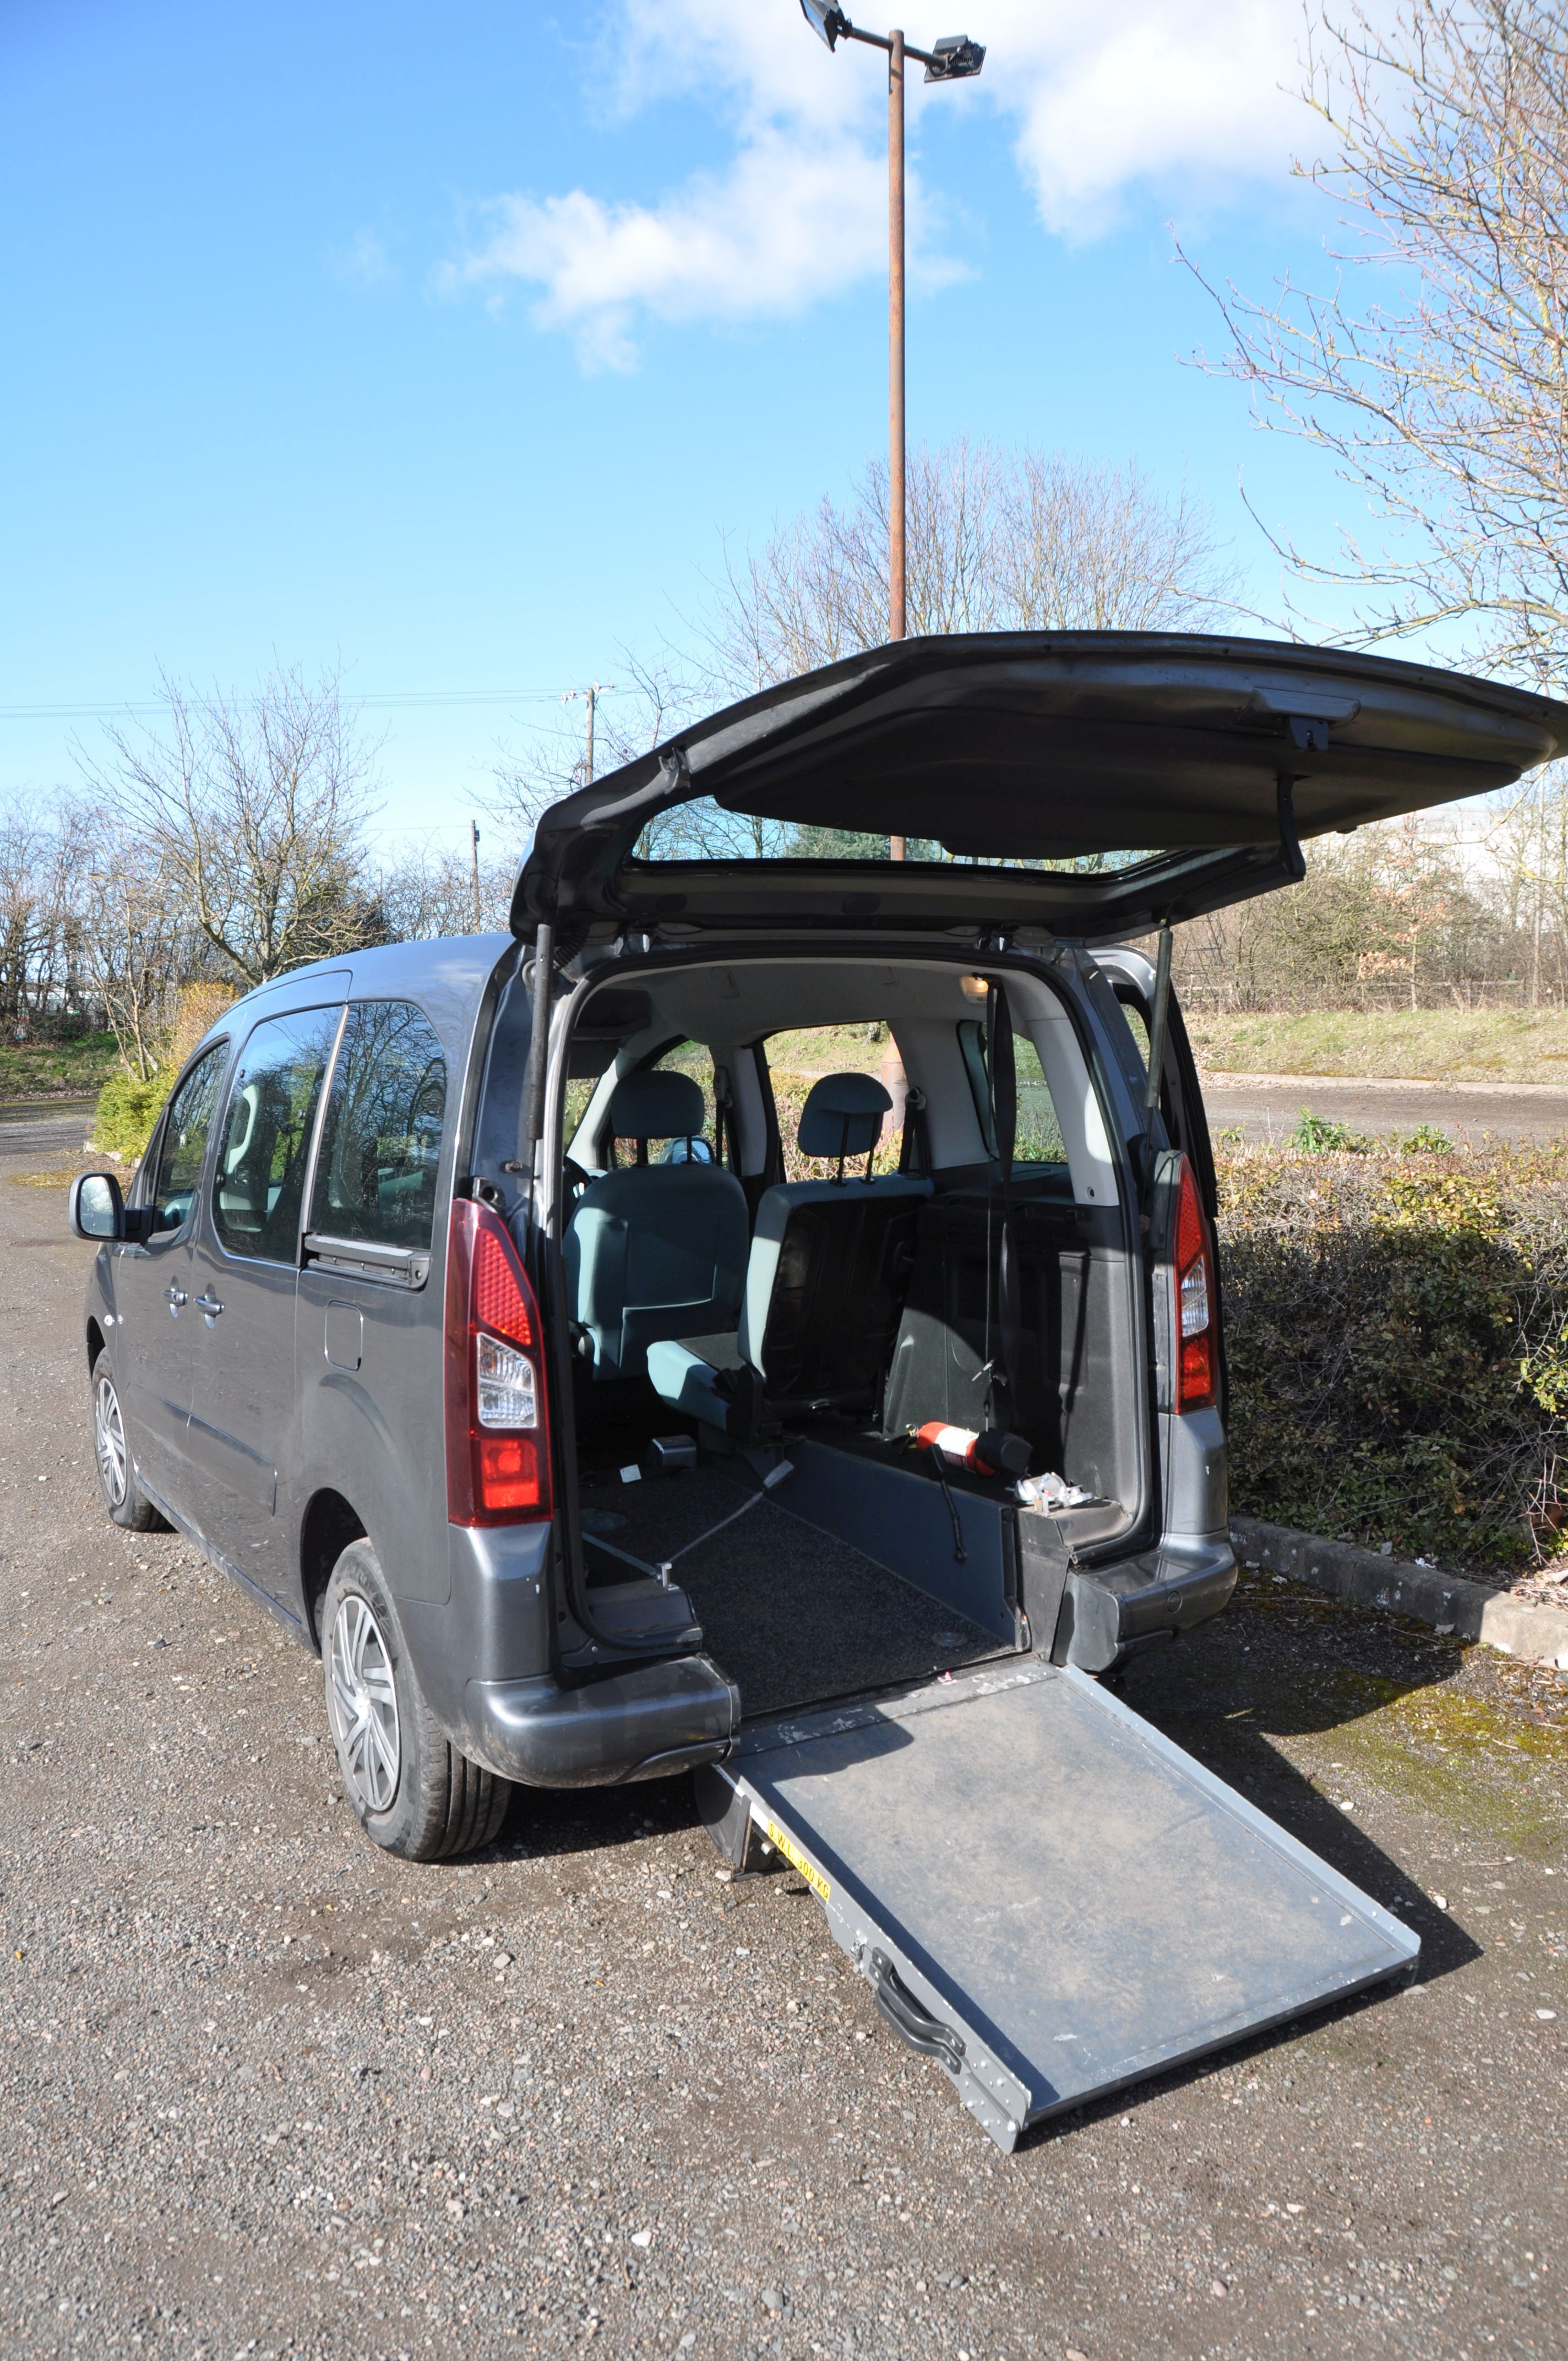 A 2014 CITROEN BERLINGO MULTISPACE GLENEAGLES CONVERSION in grey with two front and one rear seat - Image 10 of 11